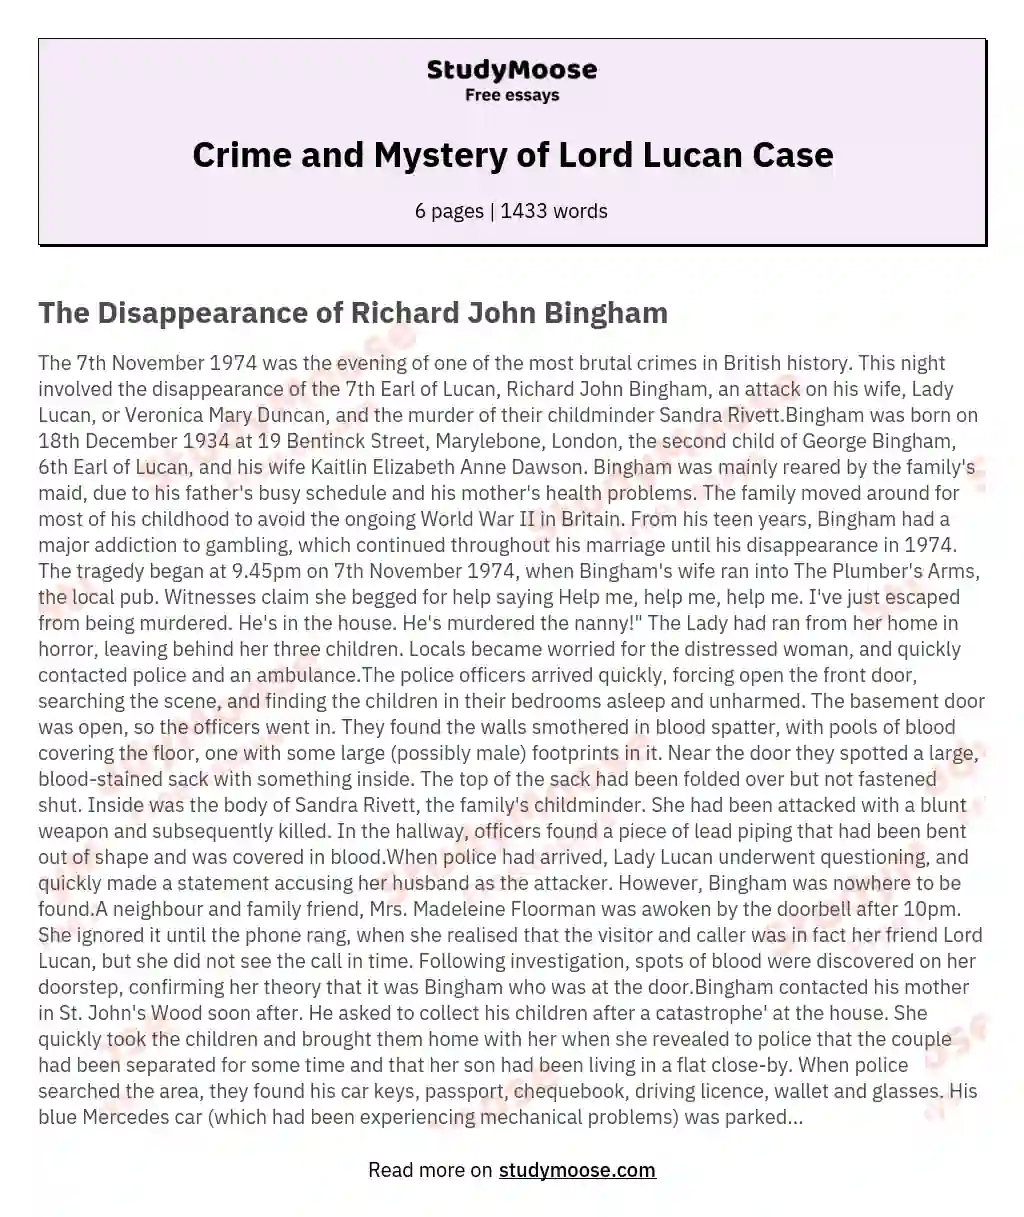 Crime and Mystery of Lord Lucan Case